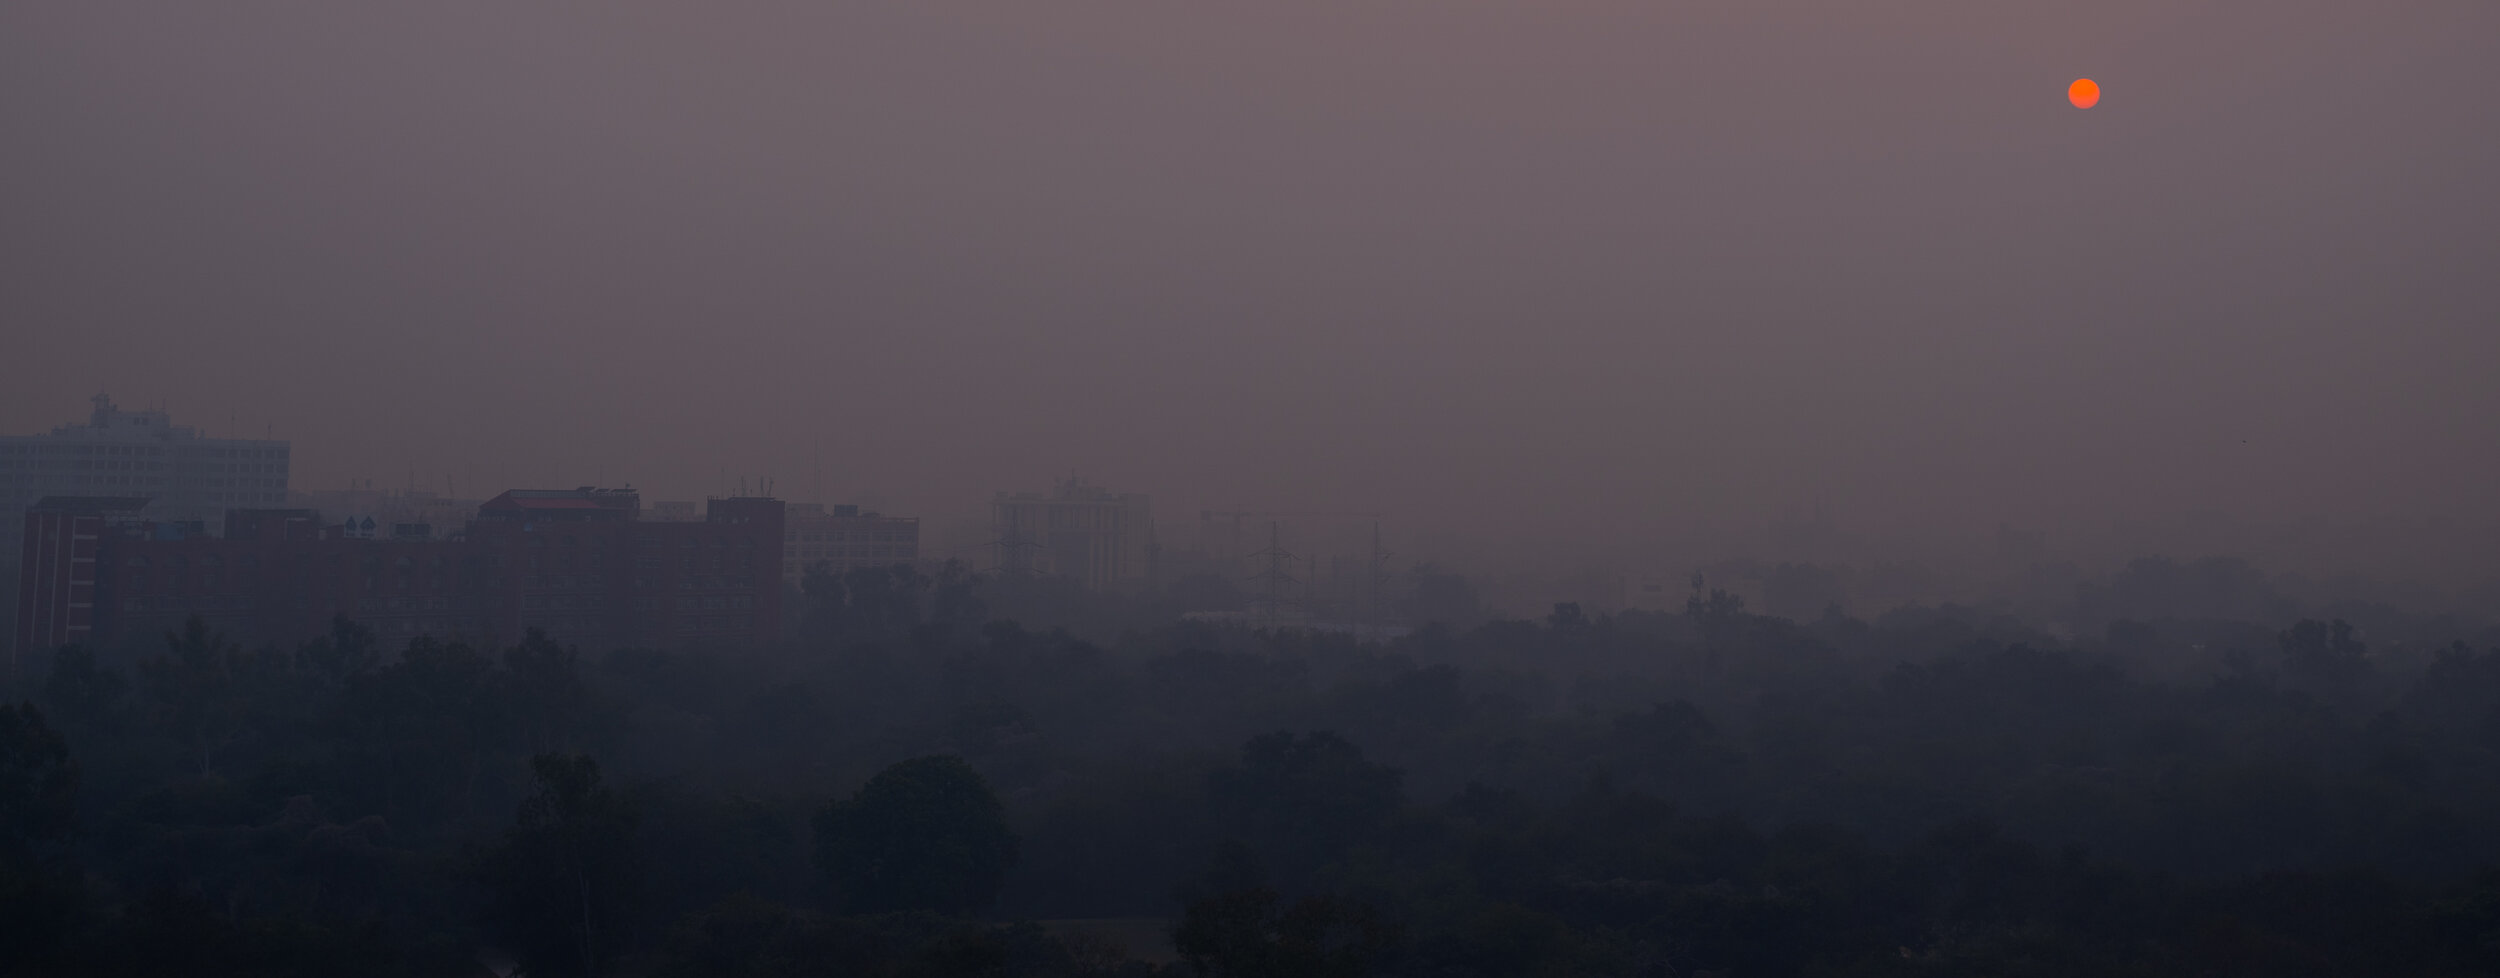 New Delhi, and Smog, at 3:00 in the afternoon December 2019.